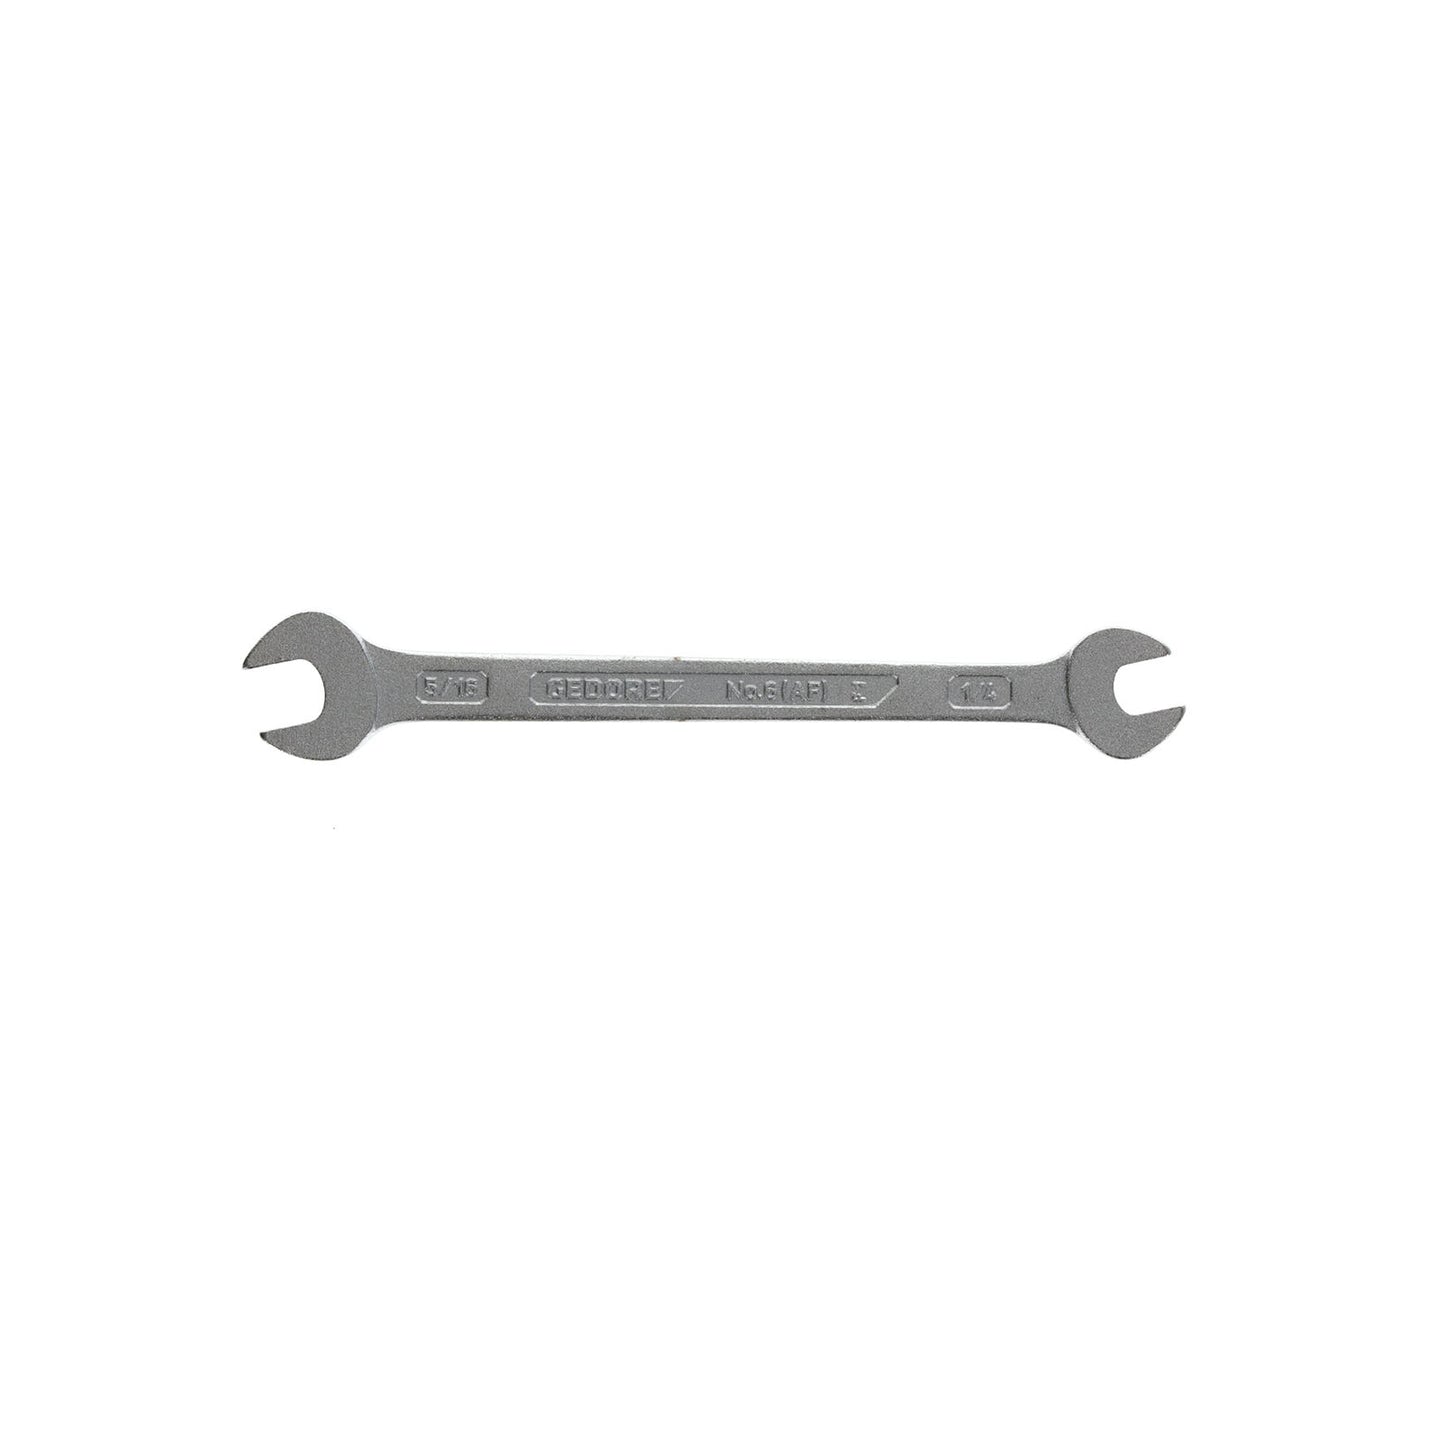 GEDORE 6 1/4X5/16AF - 2-Mount Fixed Wrench, 1/4x5/16AF (6070020)